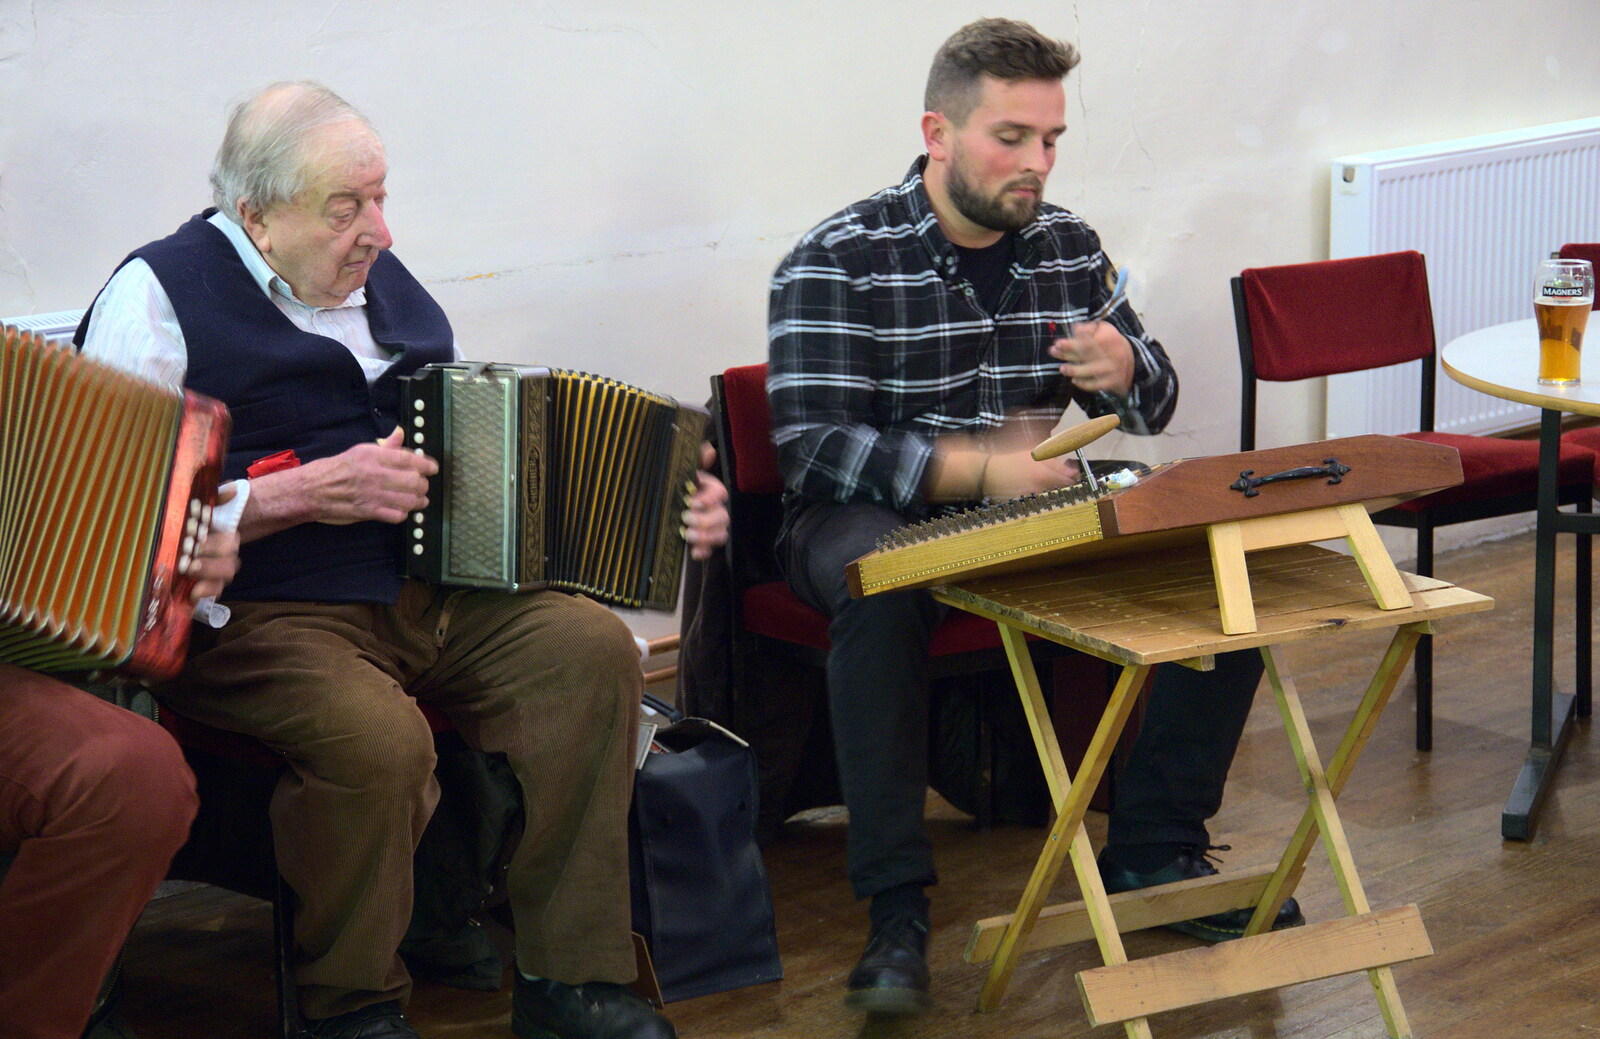 A zither is played from Big Steve's Music Night, The Village Hall, Brome, Suffolk - 6th October 2018